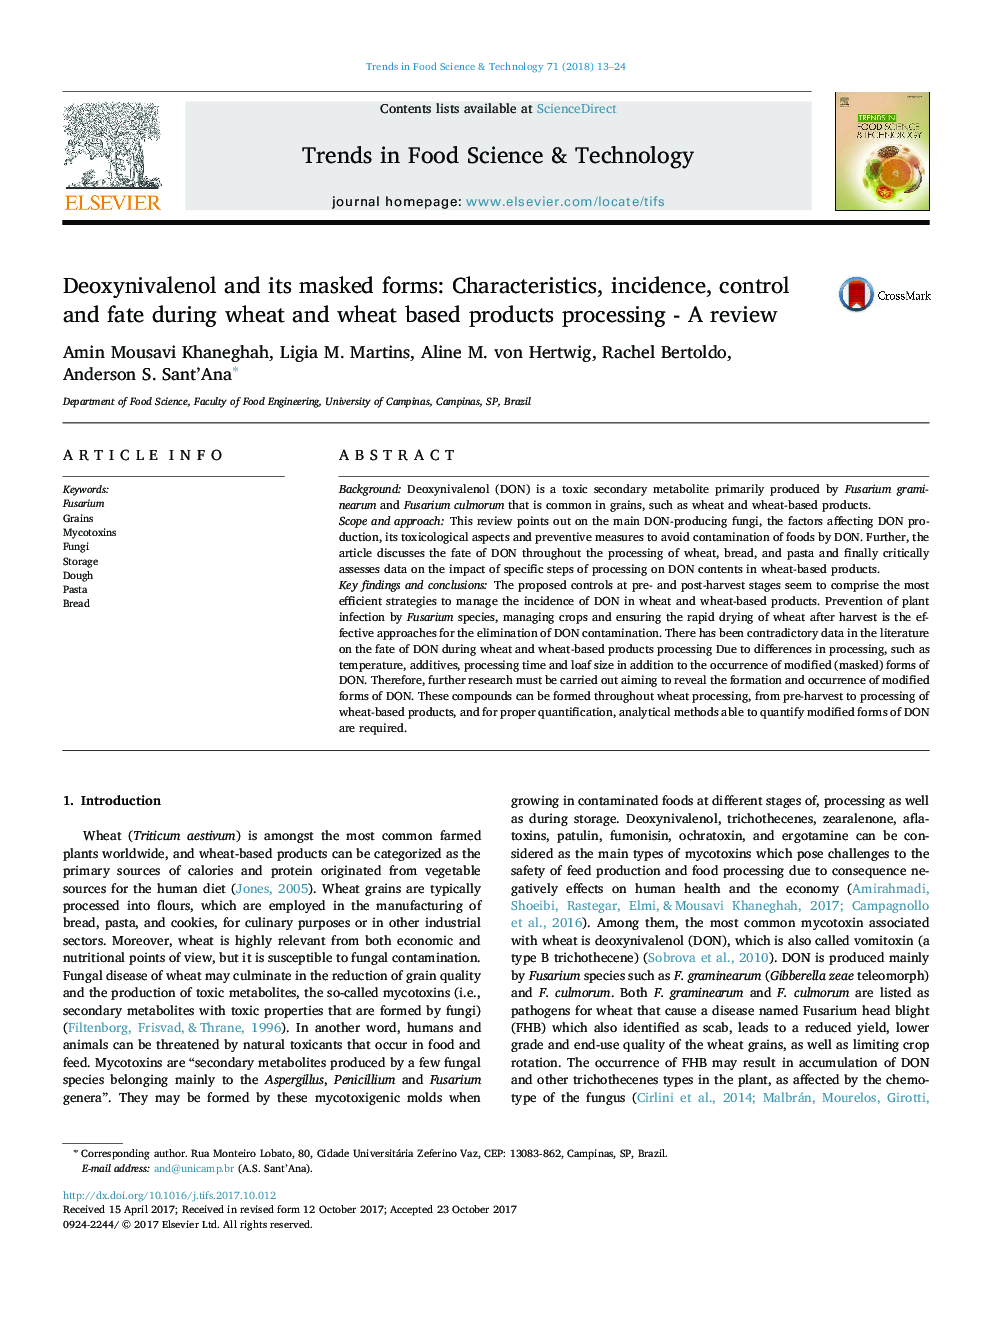 Deoxynivalenol and its masked forms: Characteristics, incidence, control and fate during wheat and wheat based products processing - A review